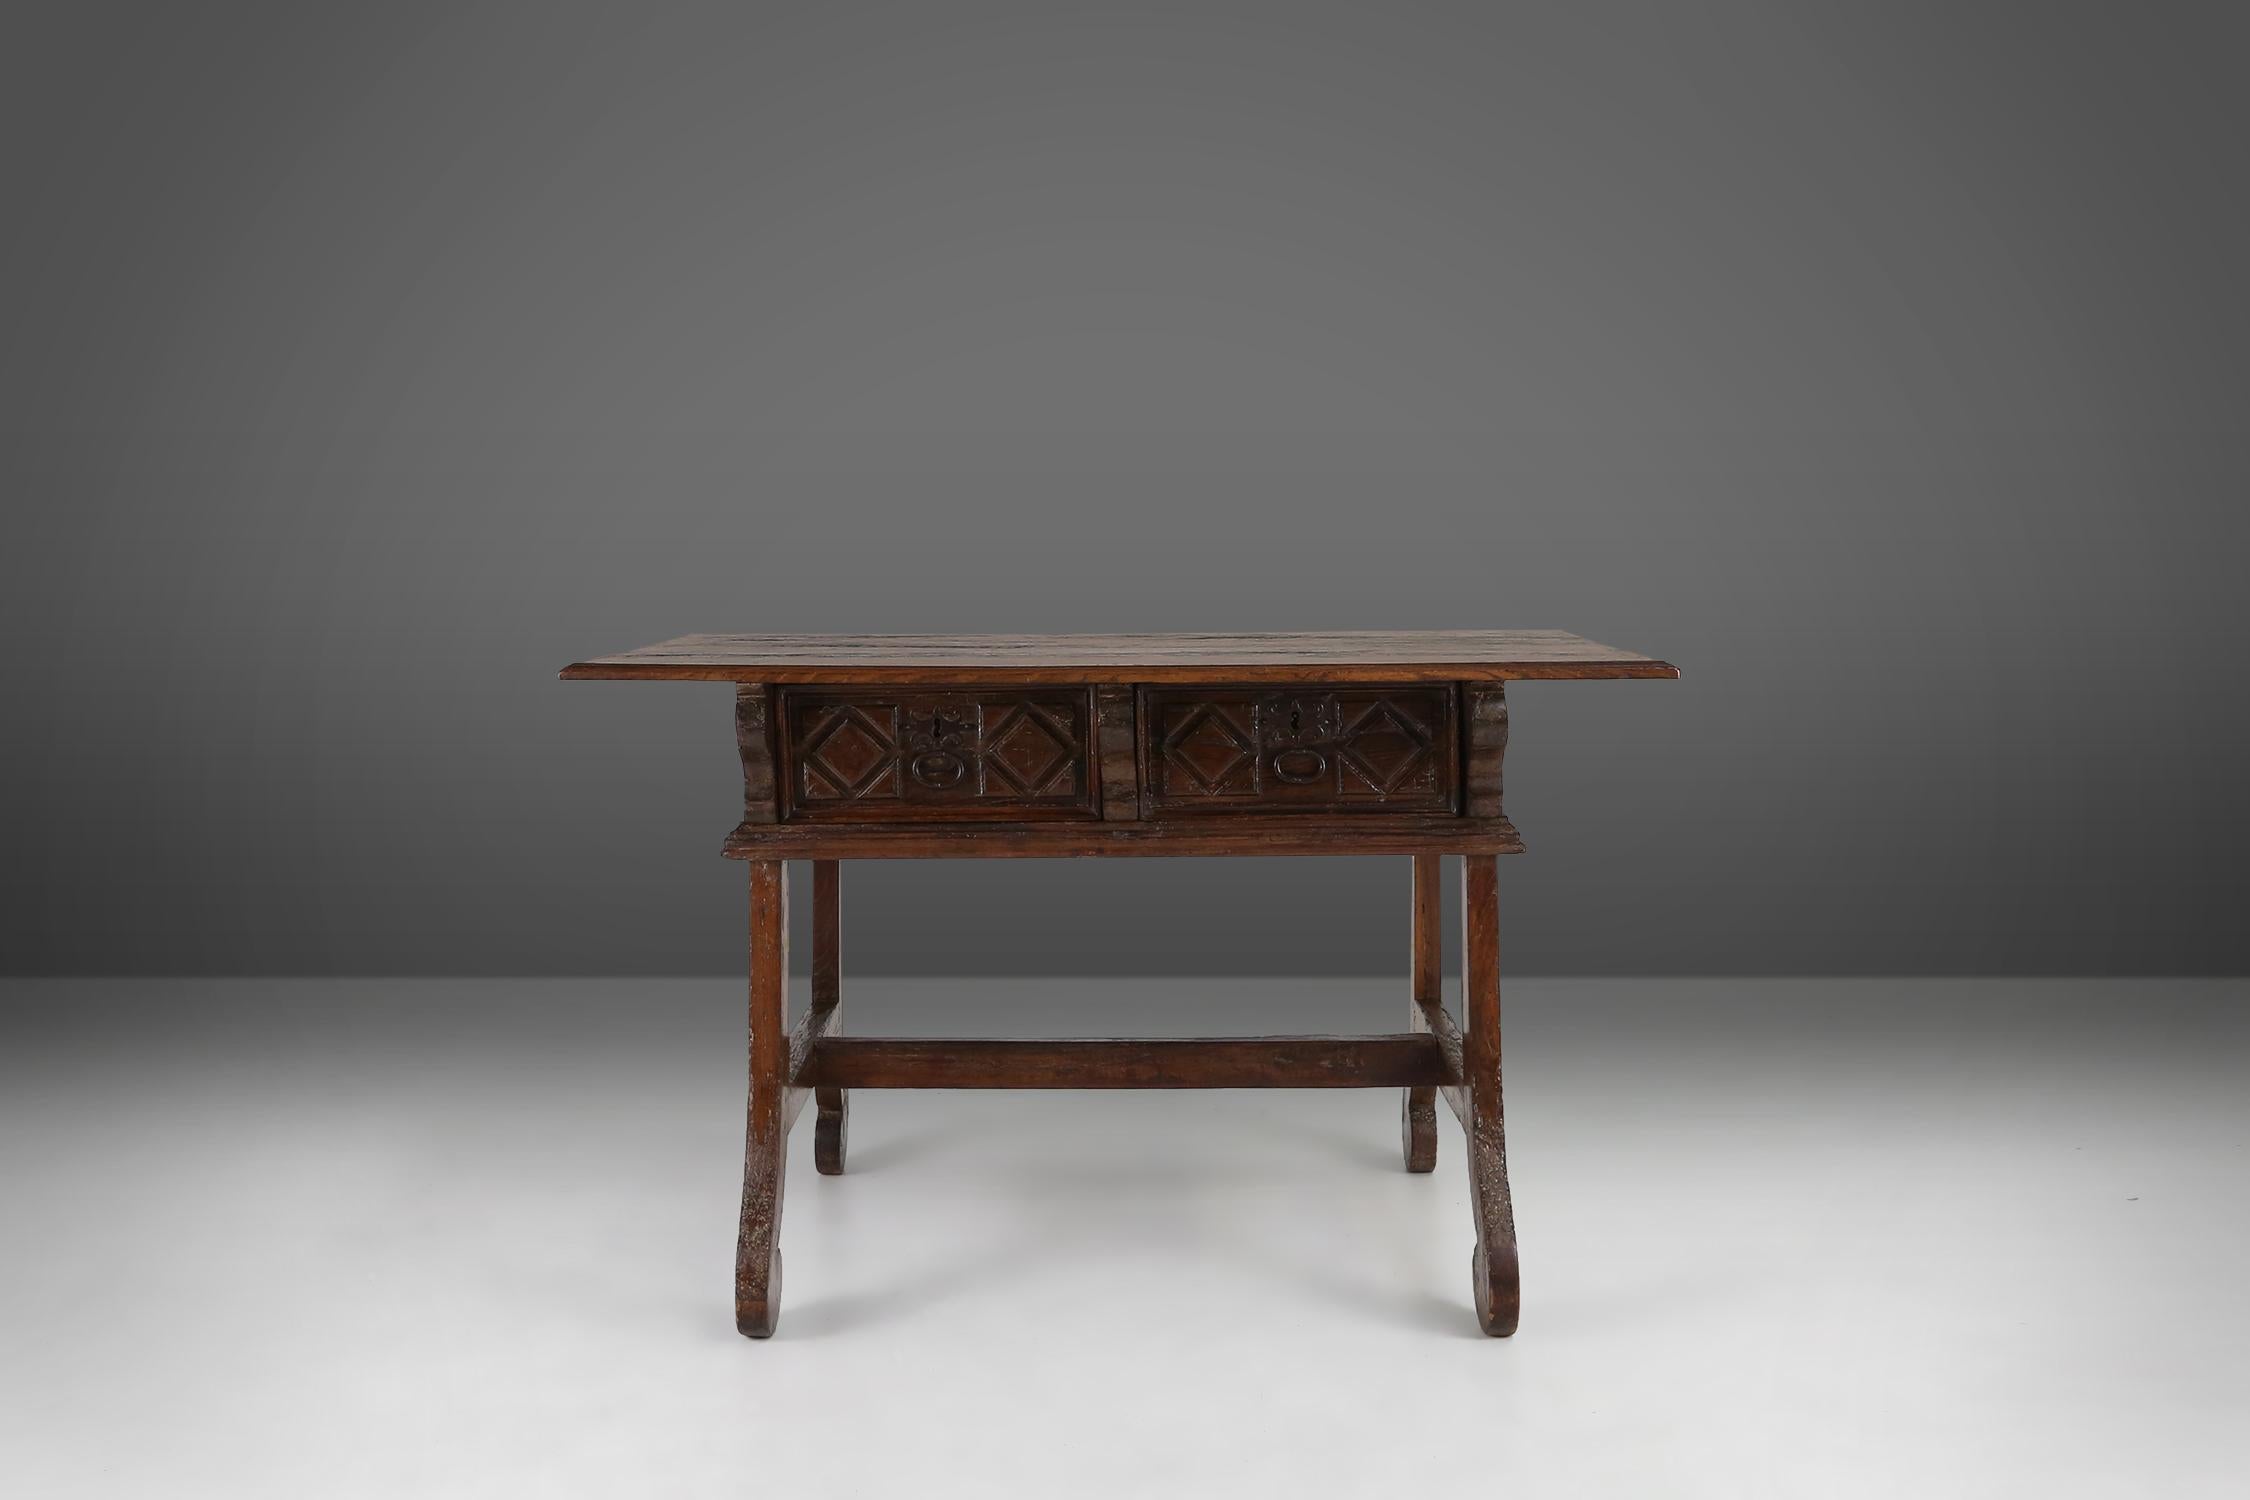 A timeless Spanish antique console table in warm oak wood with two drawers from the 18th century. 
This exquisite hand carved antique oak console table is a perfectly example of the intricate detailing and superior quality that is characteristic of